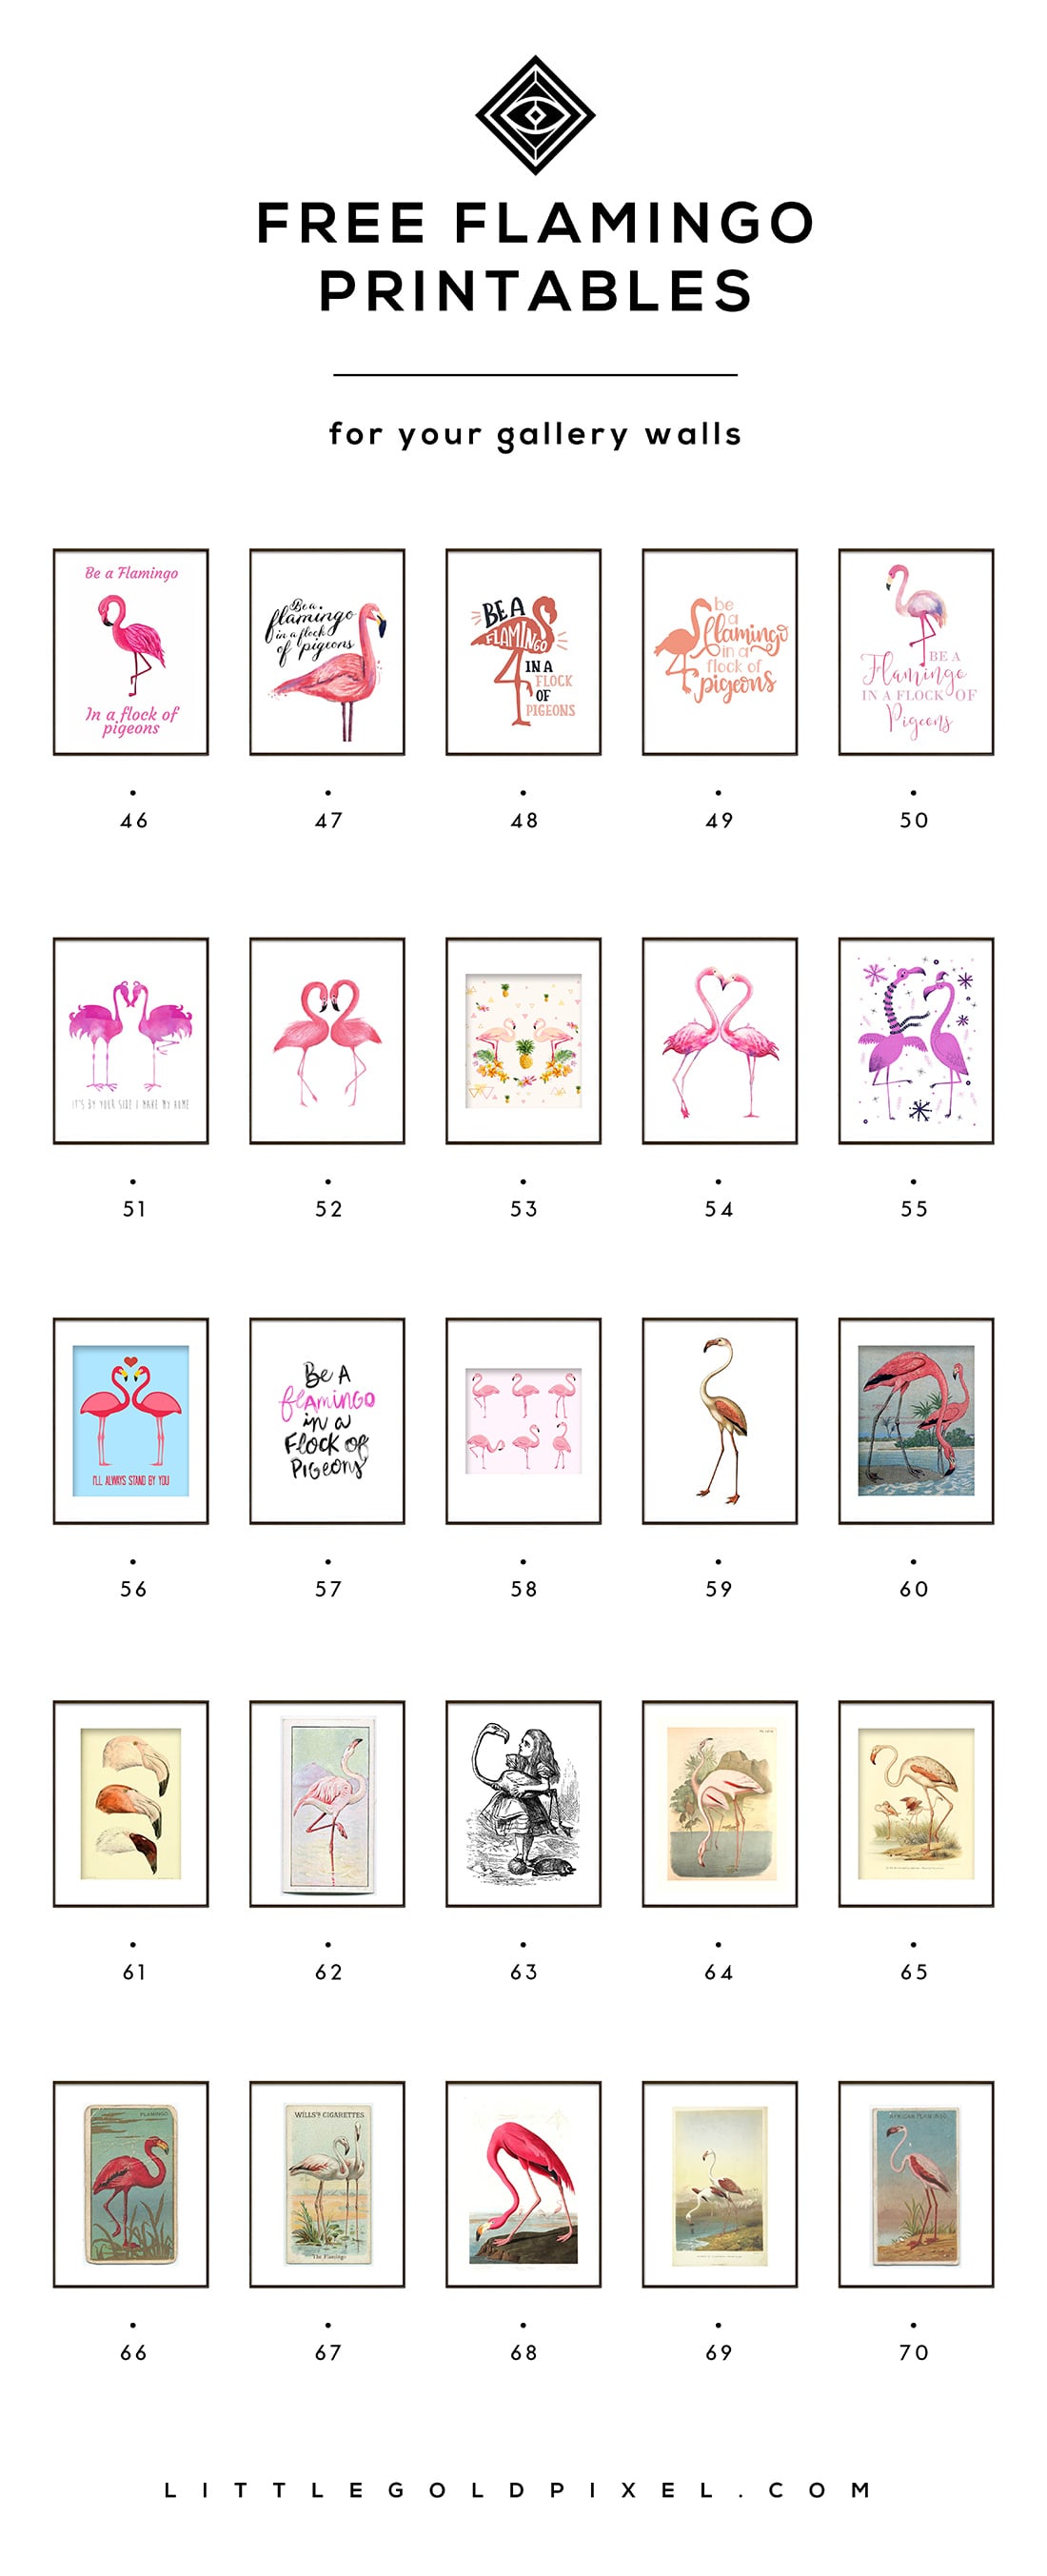 Free Flamingo Printables • 70 printable roundup! • Curated by Little Gold Pixel